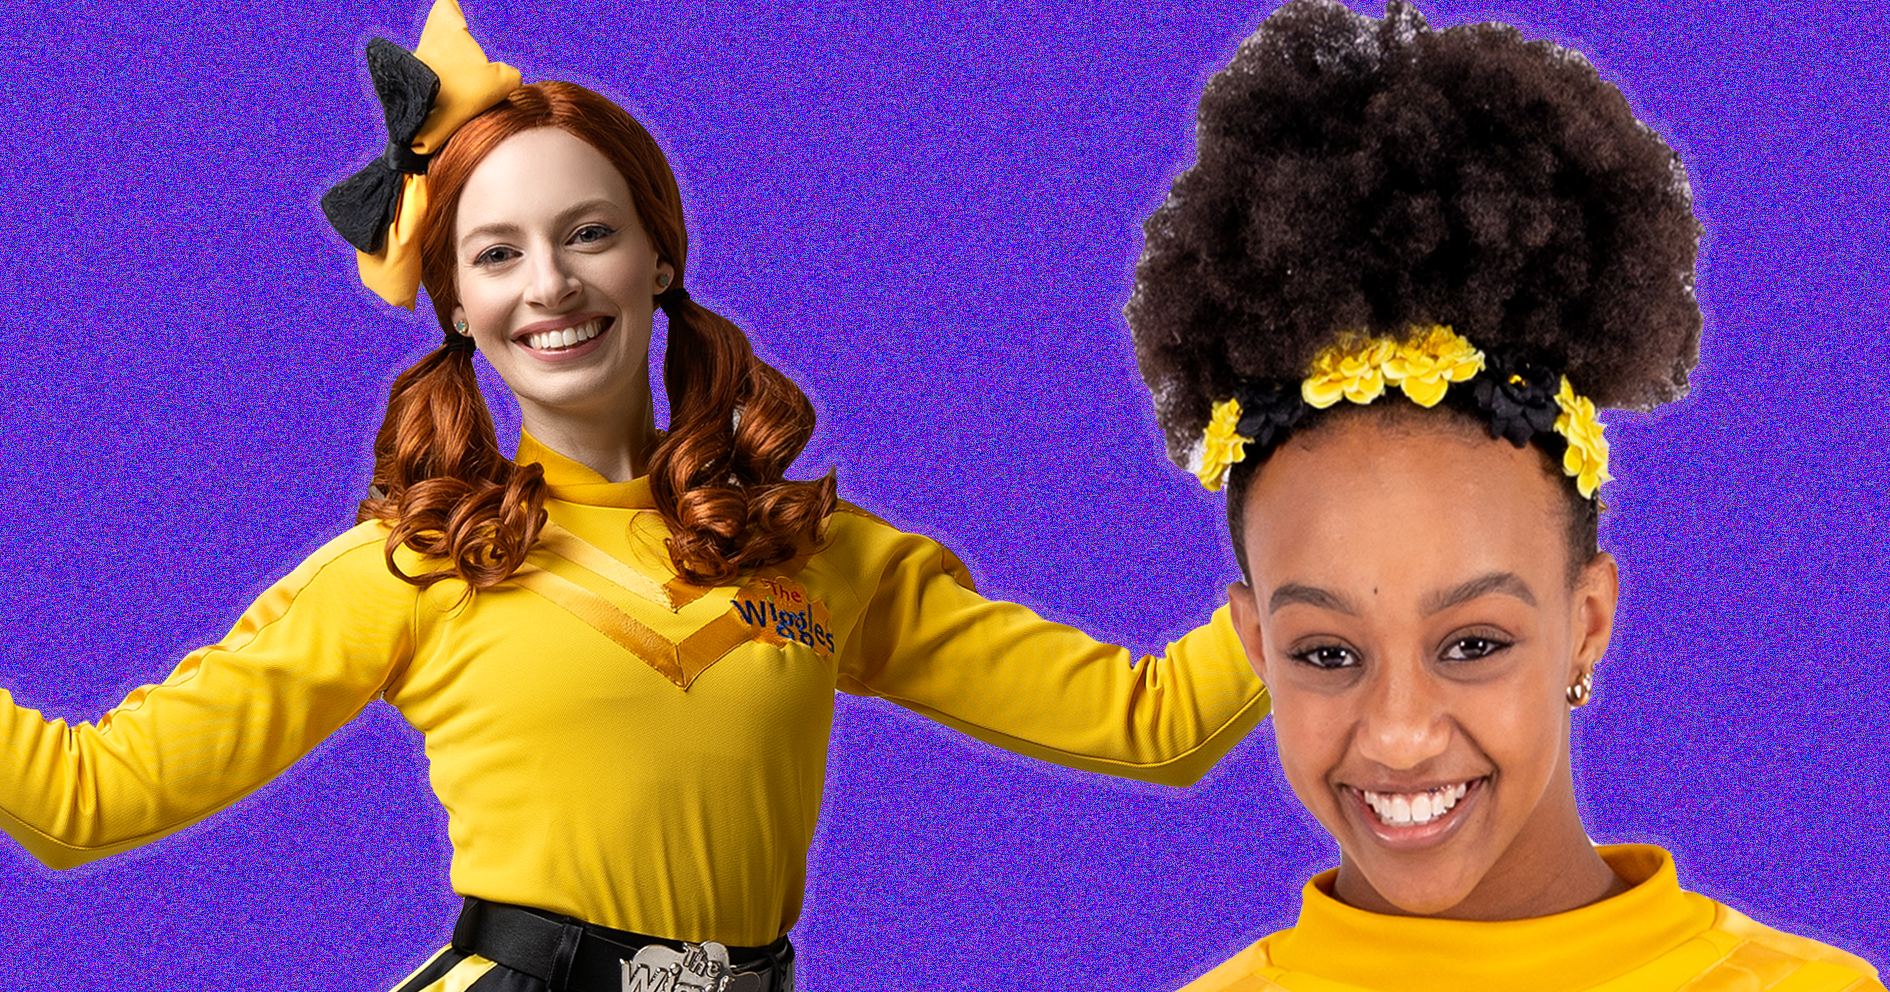 Joining the Wiggles is 'dream come true' for teen dance star Tsehay Hawkins